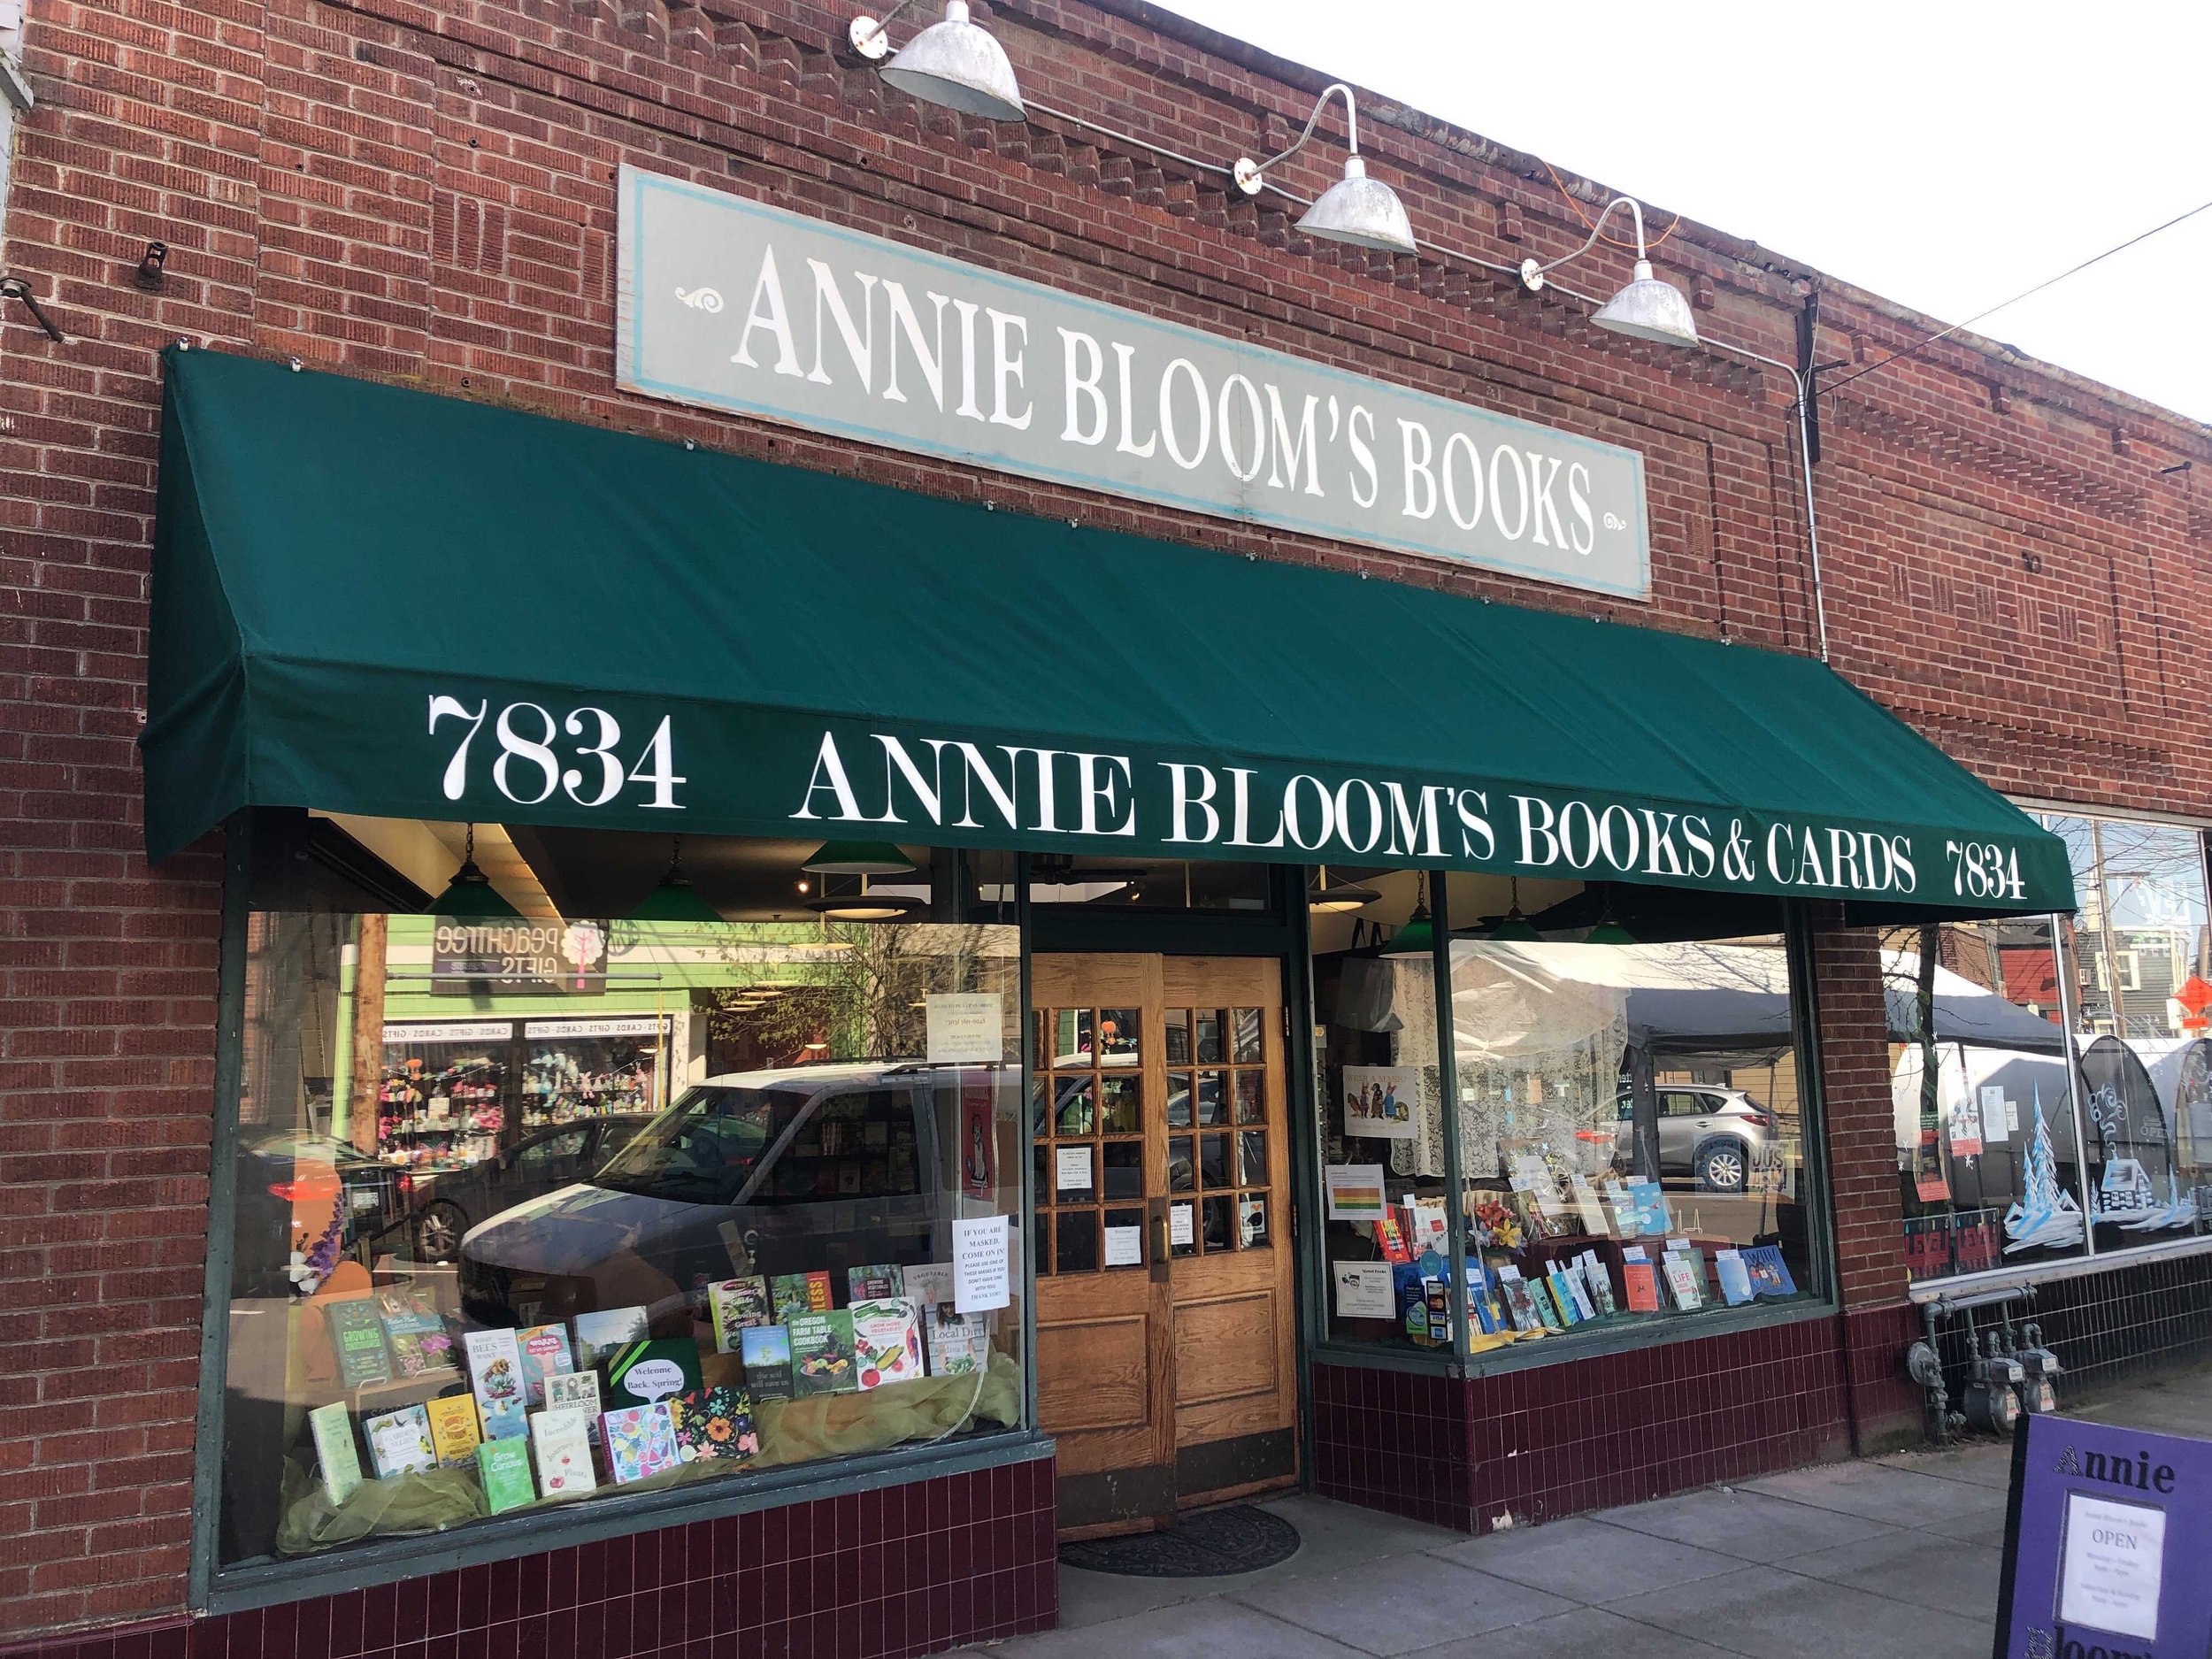 9929 Annie blooms book store after.jpg